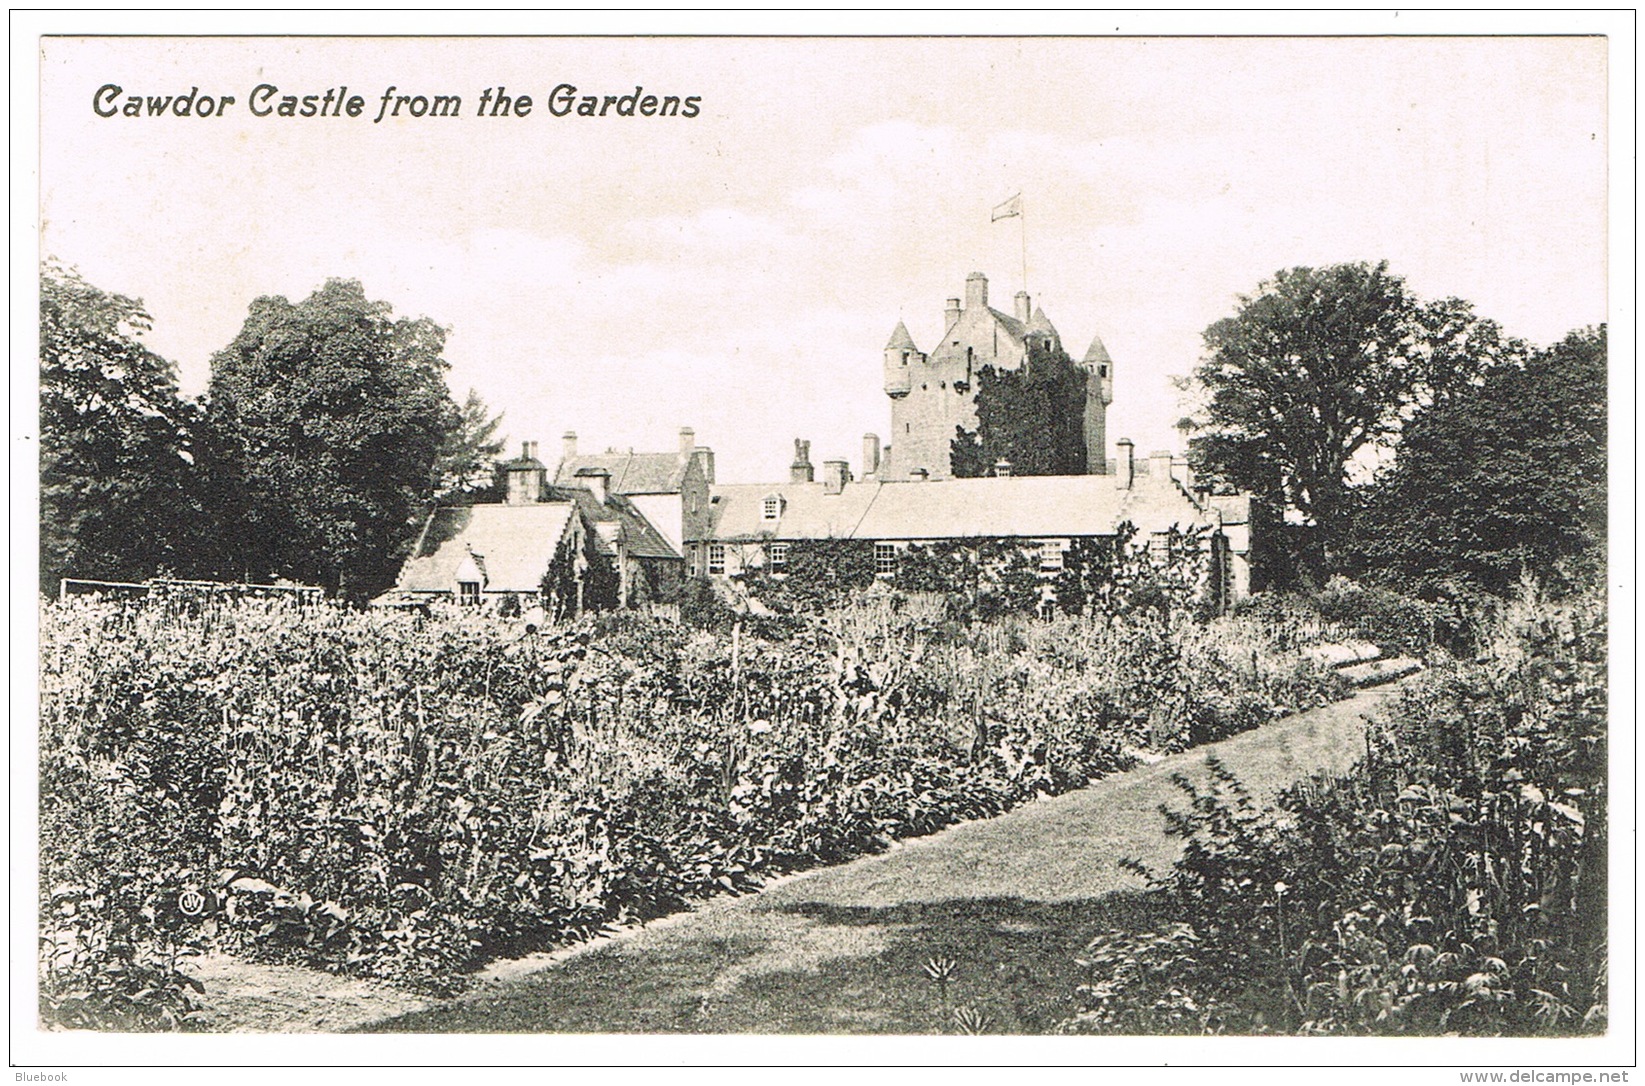 RB 1174 - Early Postcard - Cawdor Castle From The Gardens - Nairnshire Scotland - Nairnshire